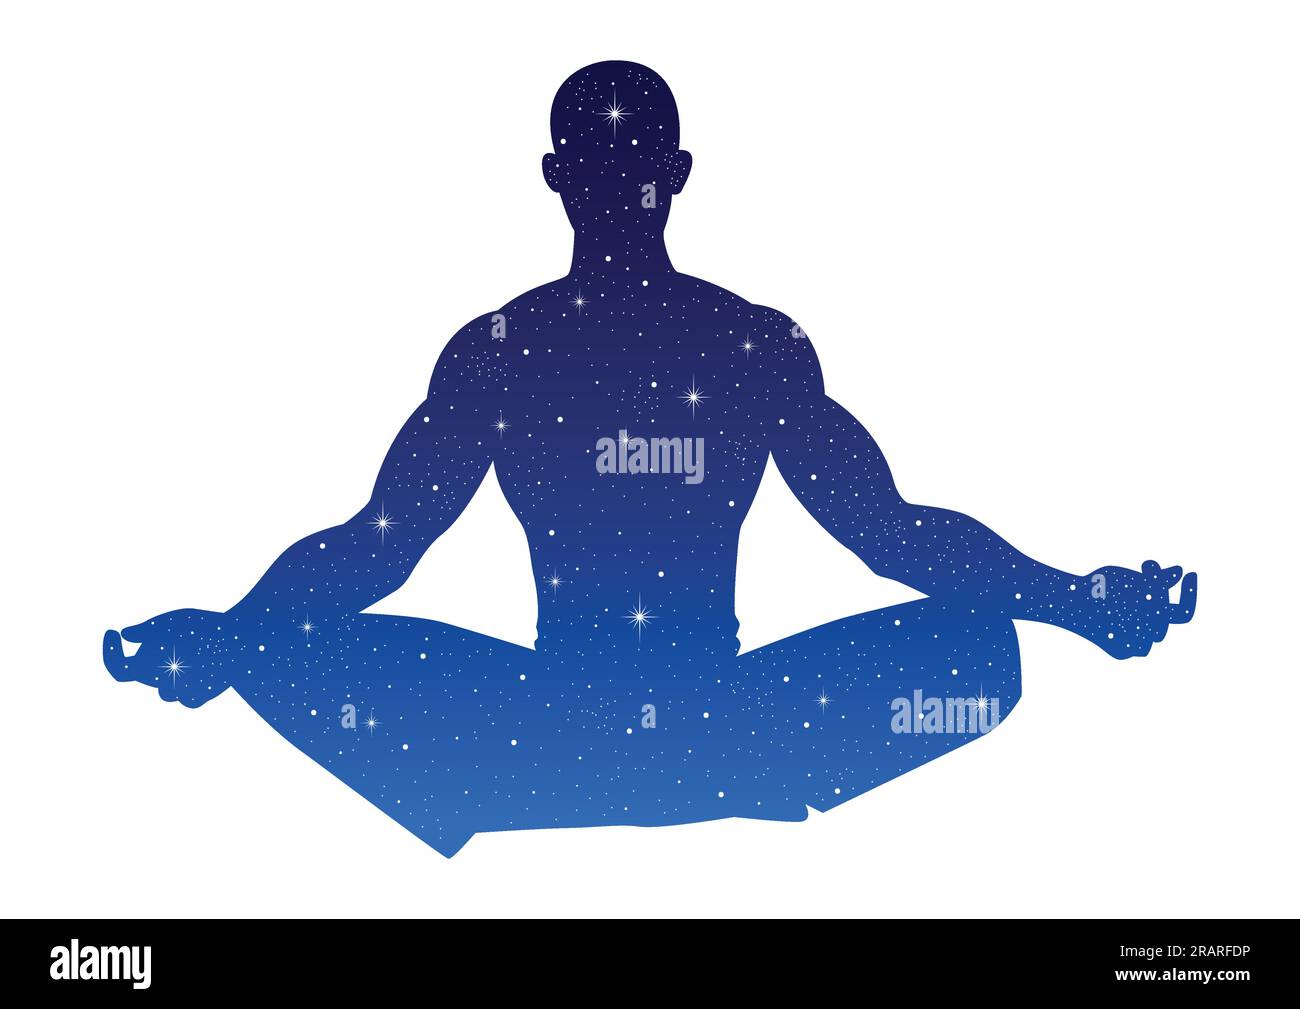 Silhouette illustration of a male figure meditating with stars texture Stock Vector